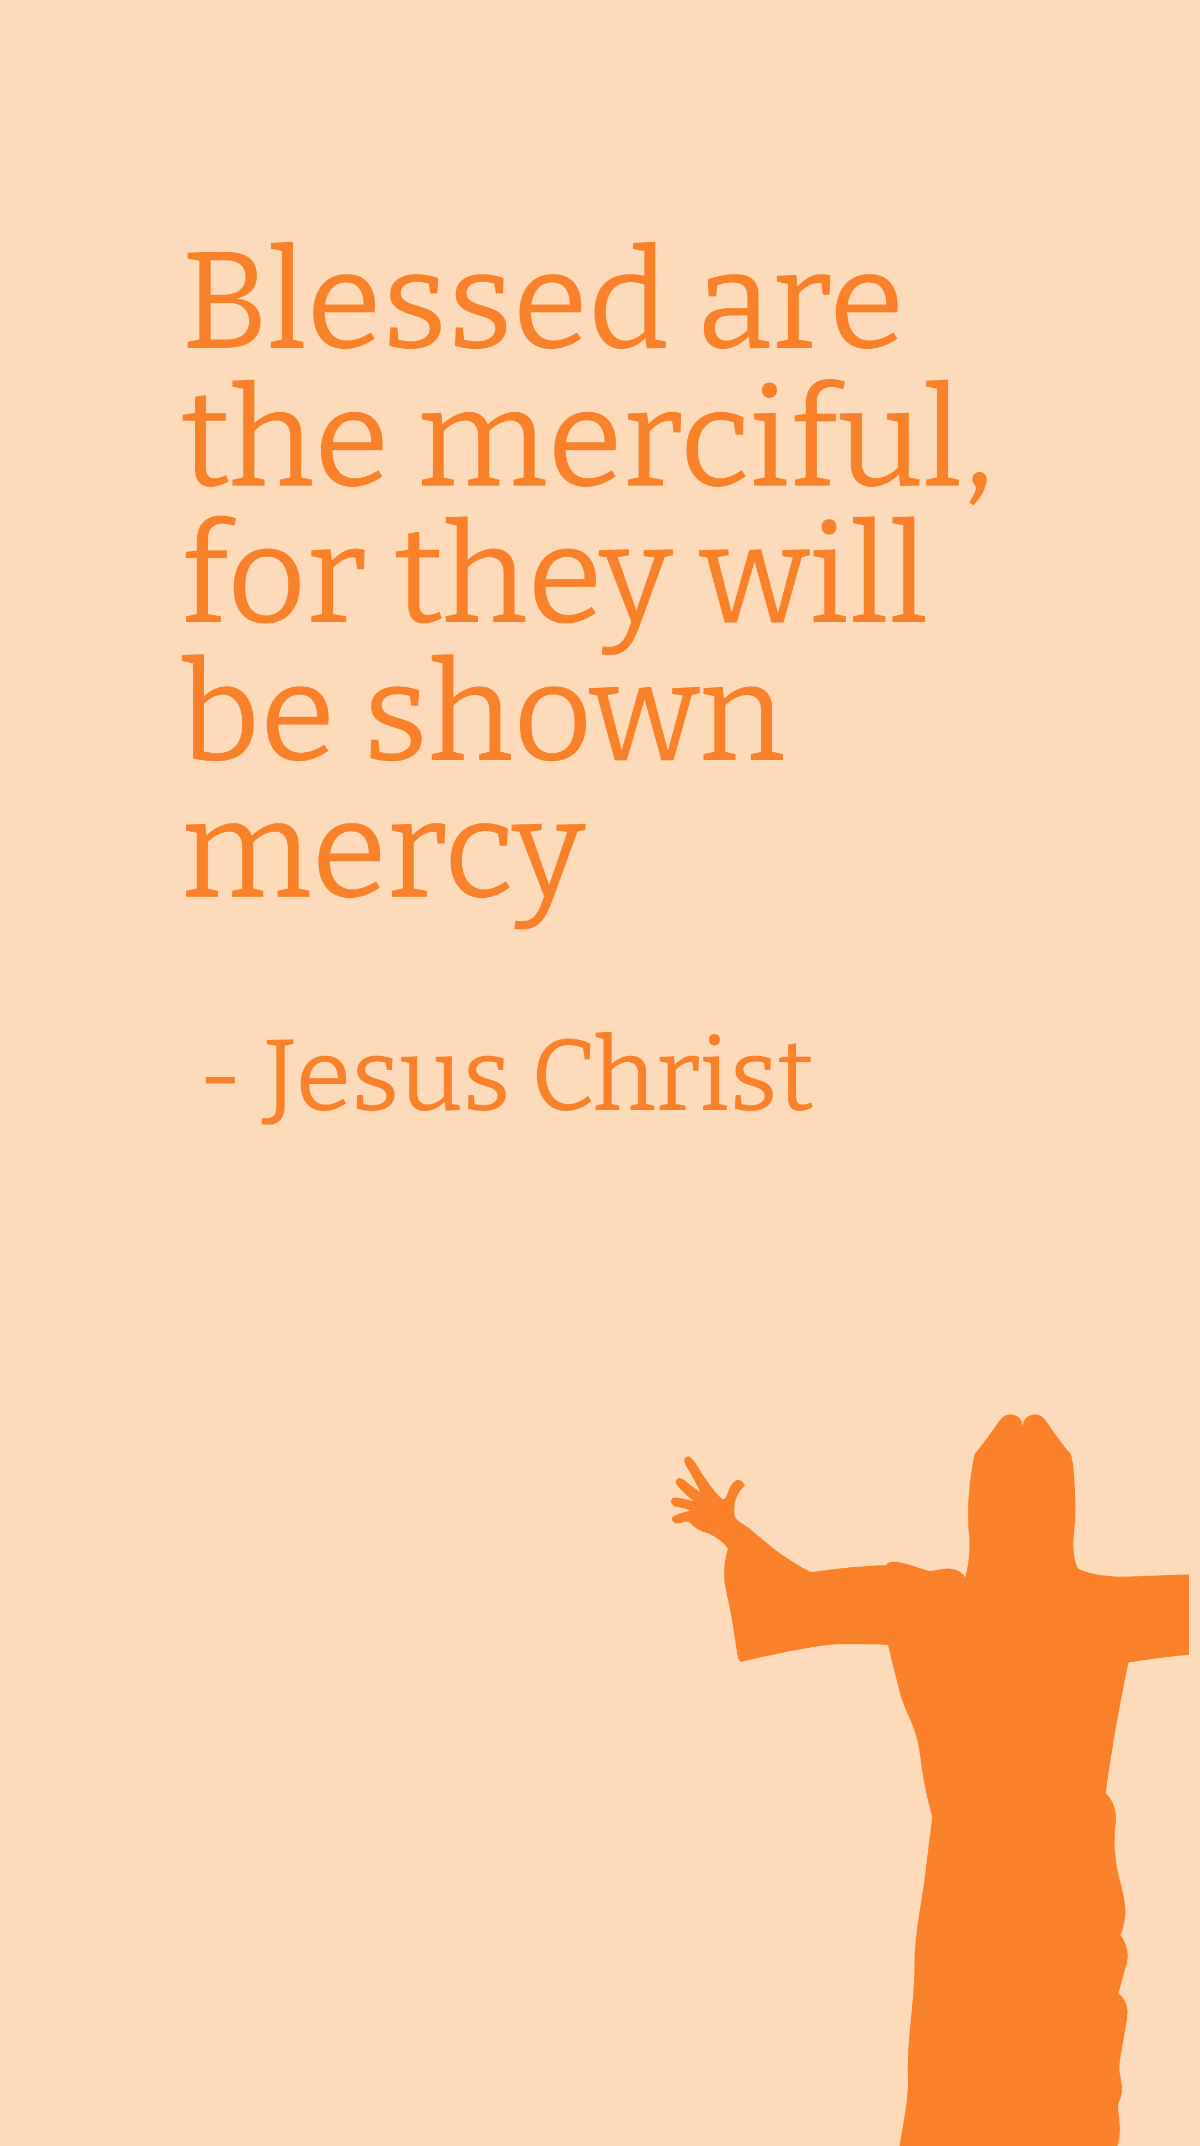 Jesus Christ - Blessed are the merciful, for they will be shown mercy